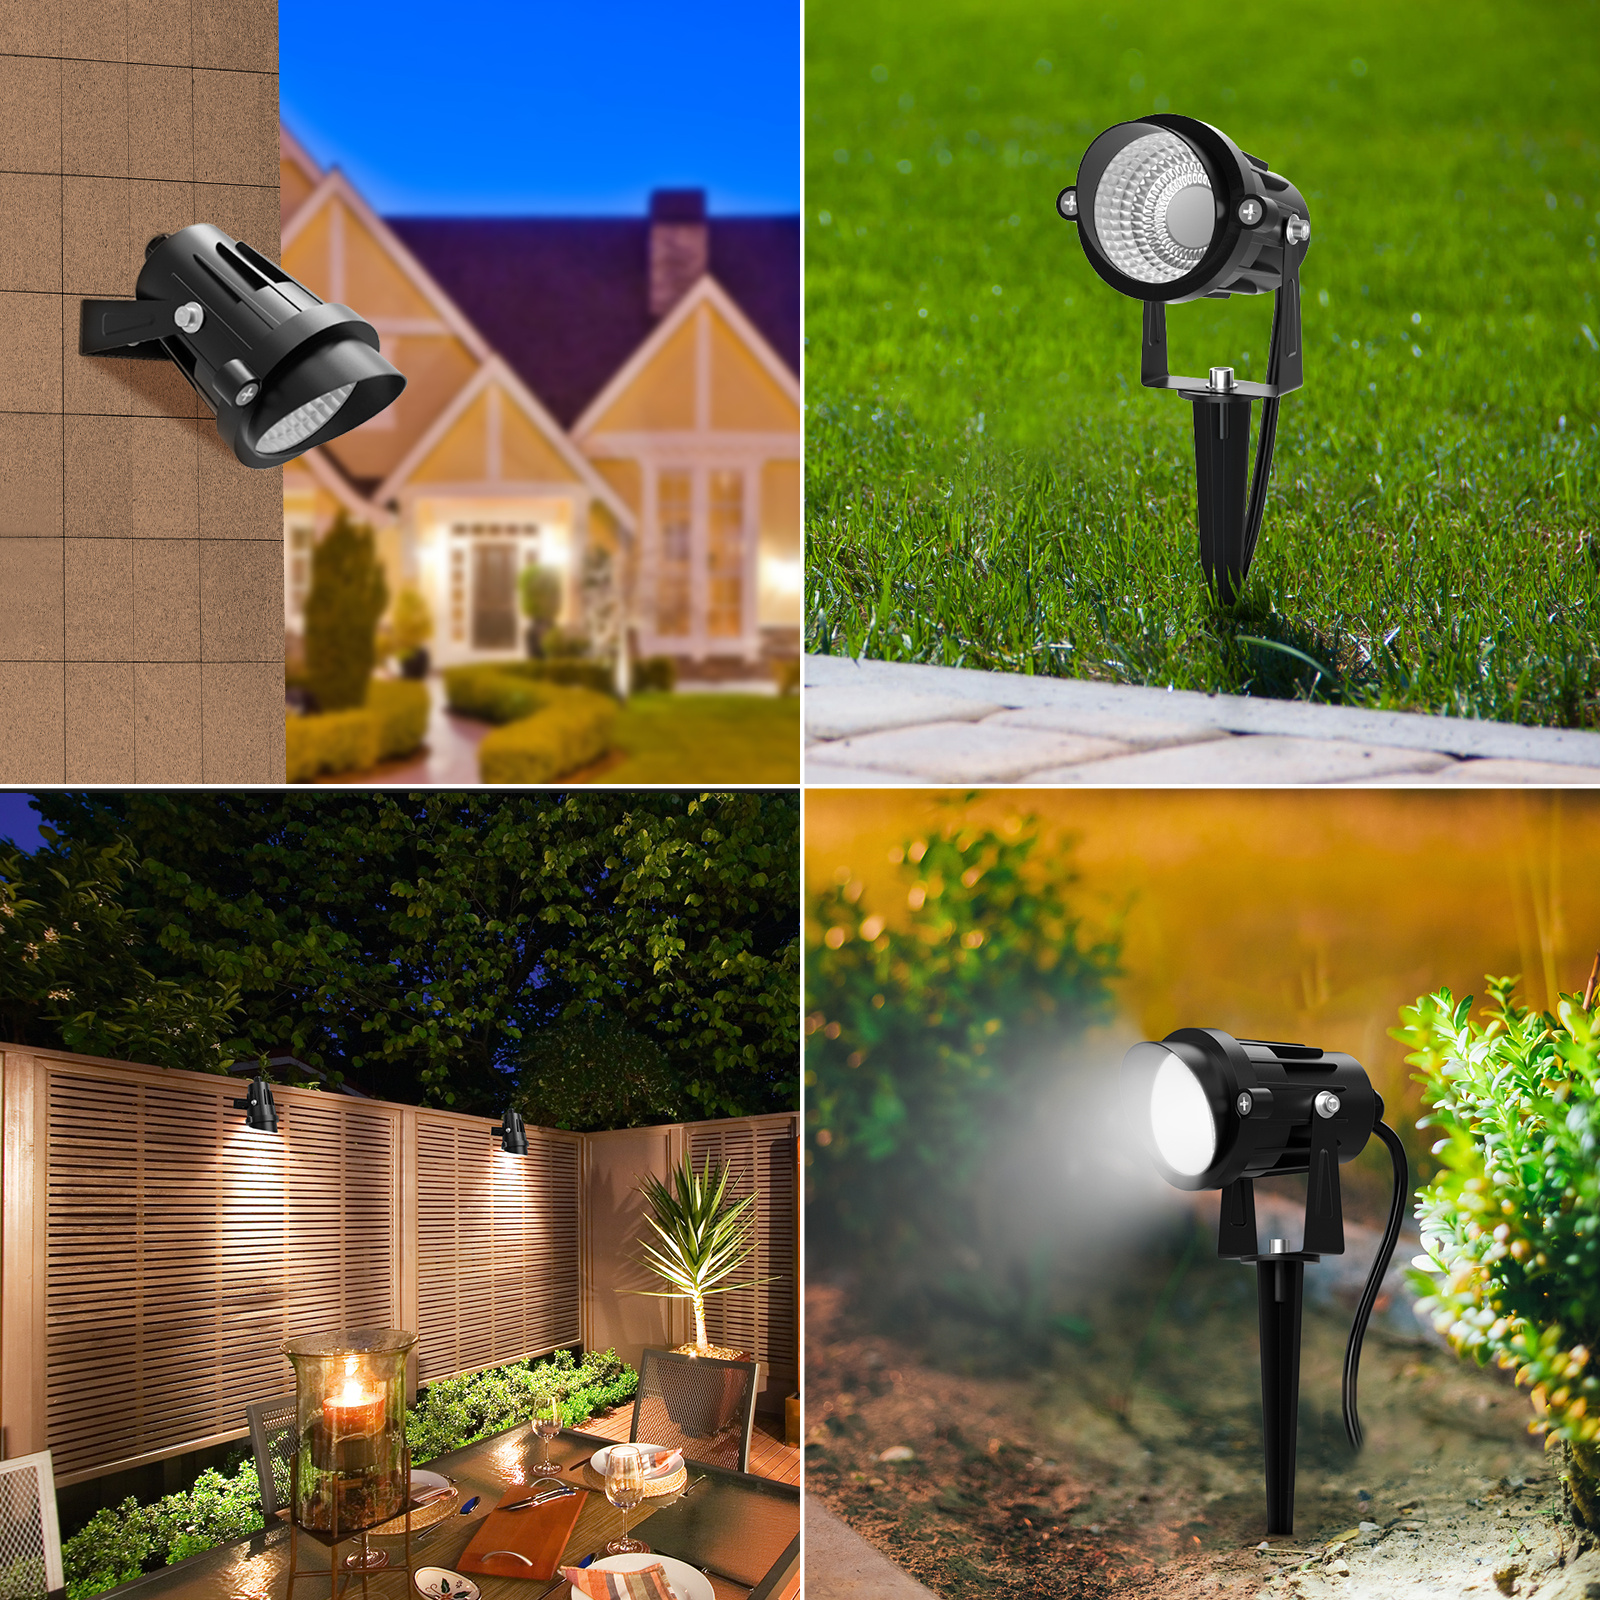 Landscape Light LED,Znfrt Low Voltage IP65 Waterproof Outdoor Landscaping Spot Lights,RGB Color Changing Remote Control Dimmable Outdoor Landscape Lights Suitable for Patio Garden Driveway Porch